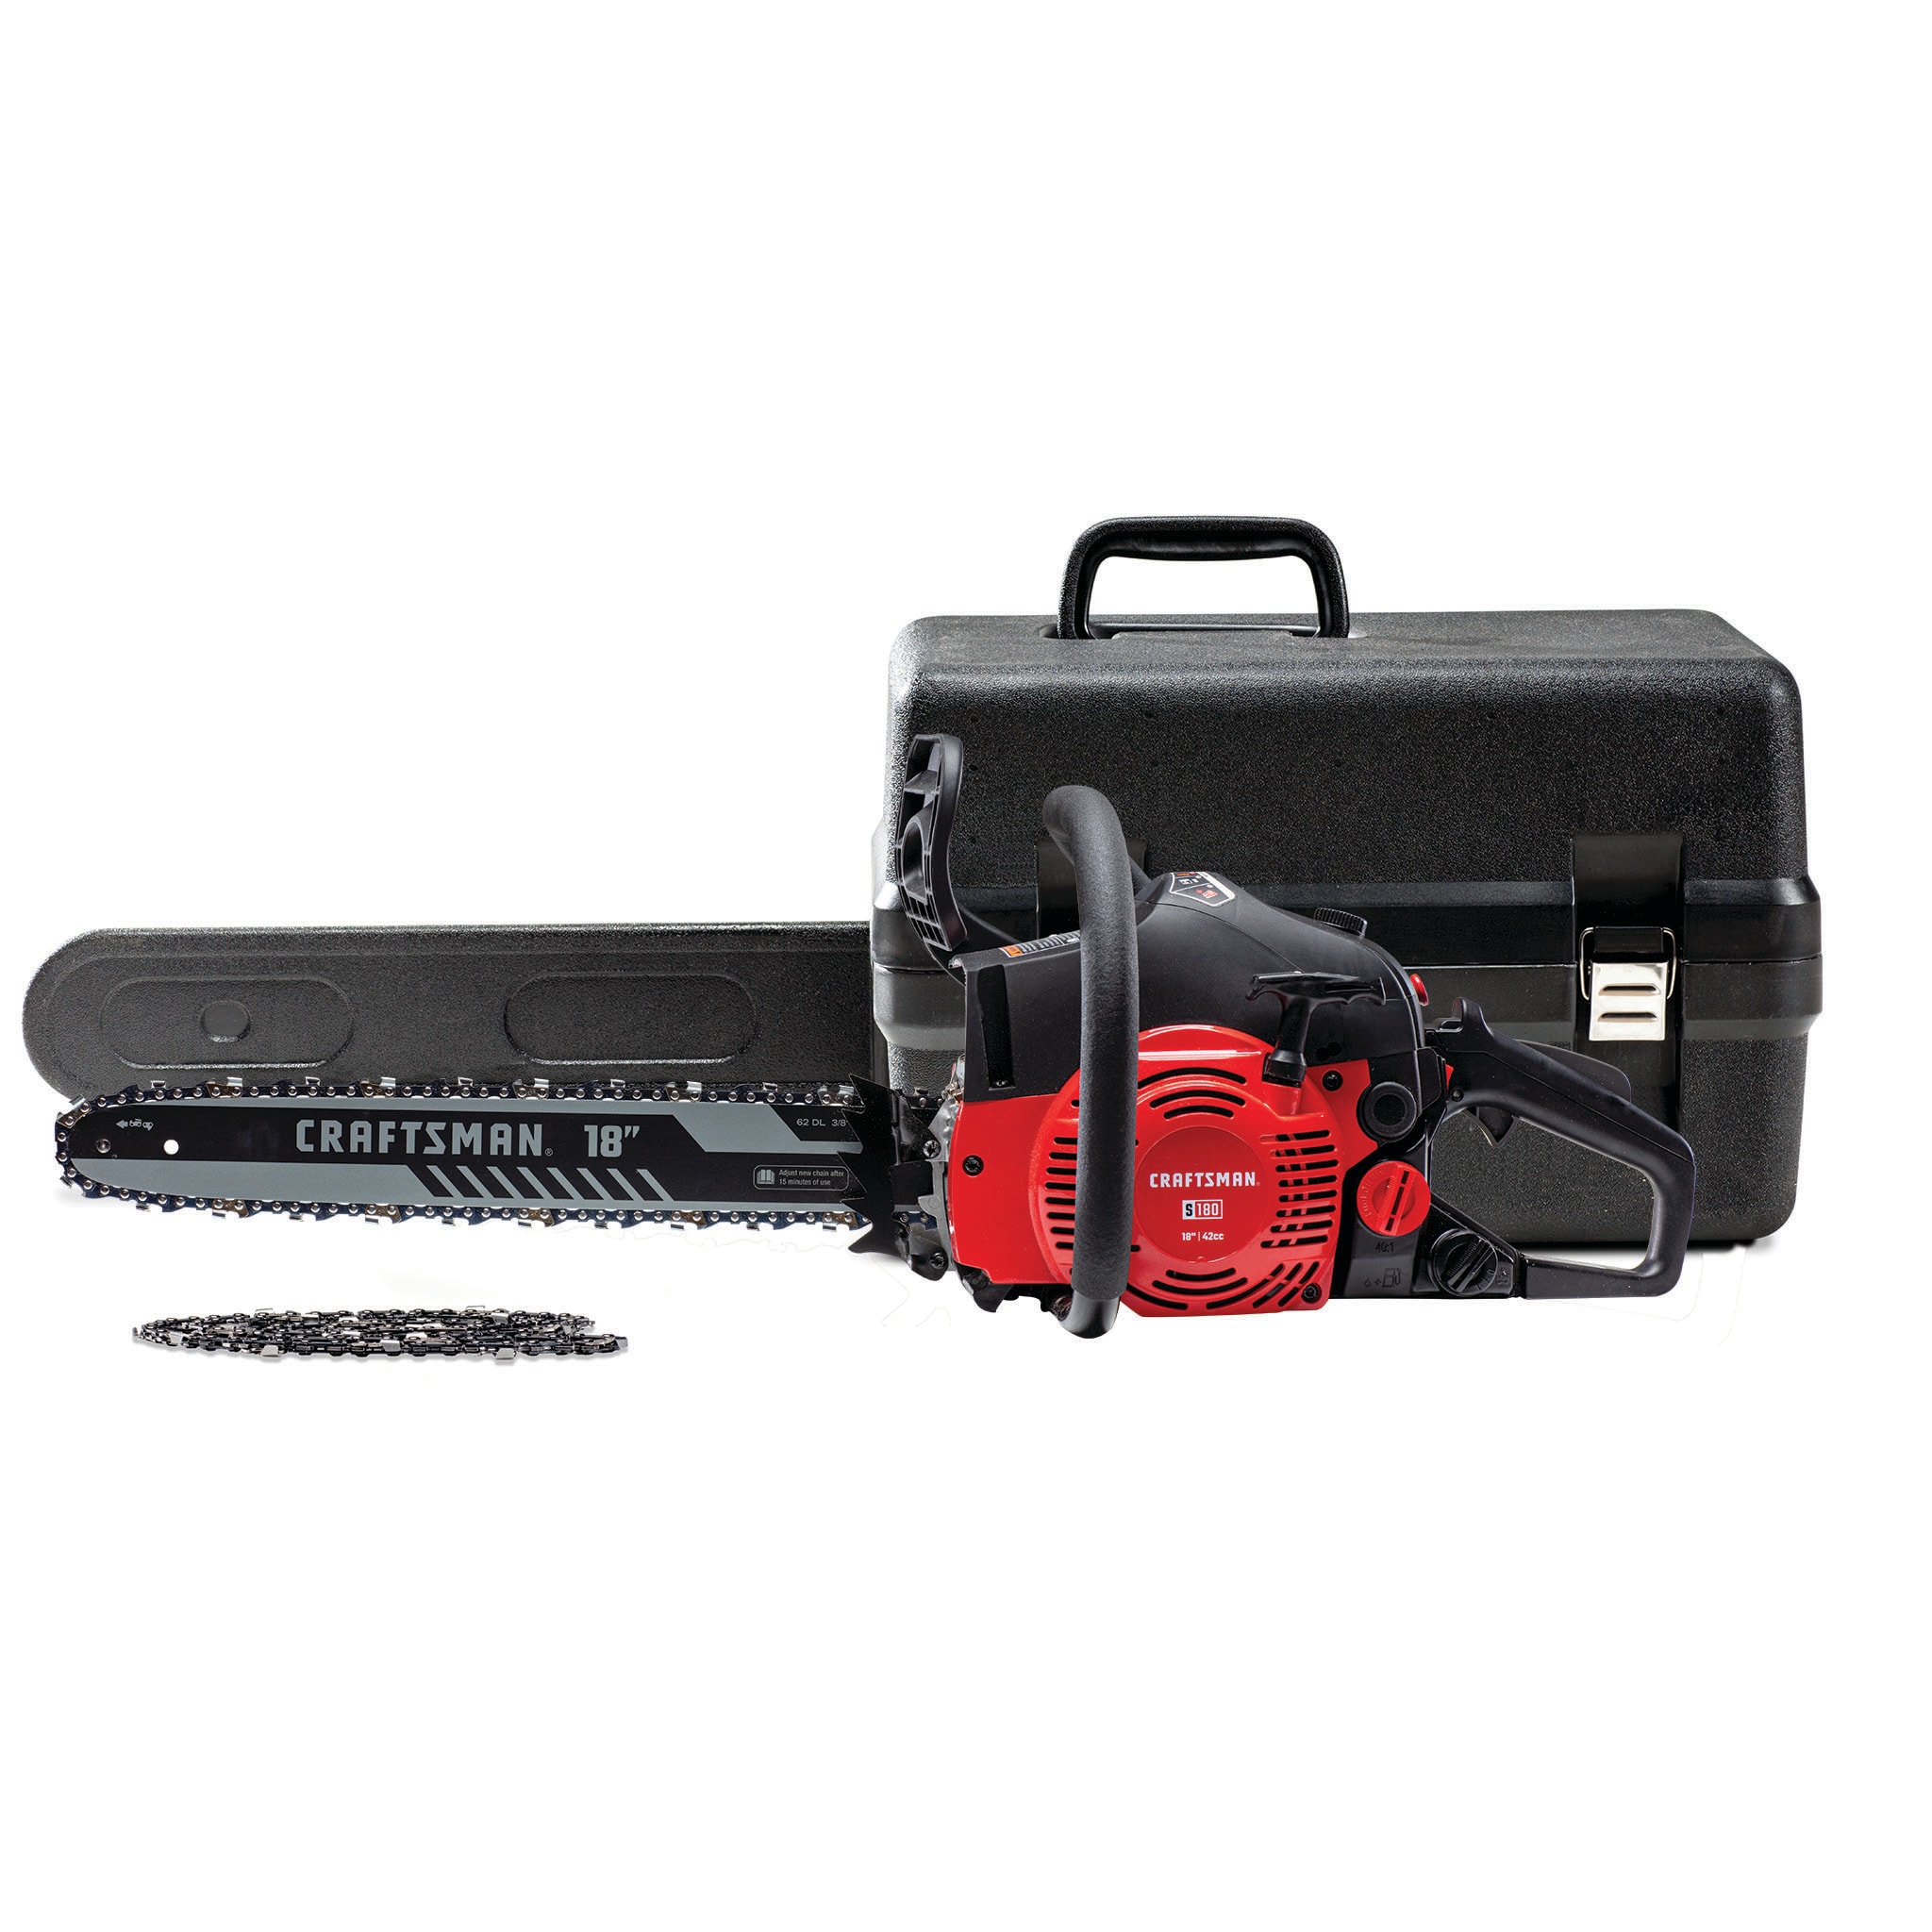 CRAFTSMAN S180 42-cc 2-cycle 18-in Gas Chainsaw